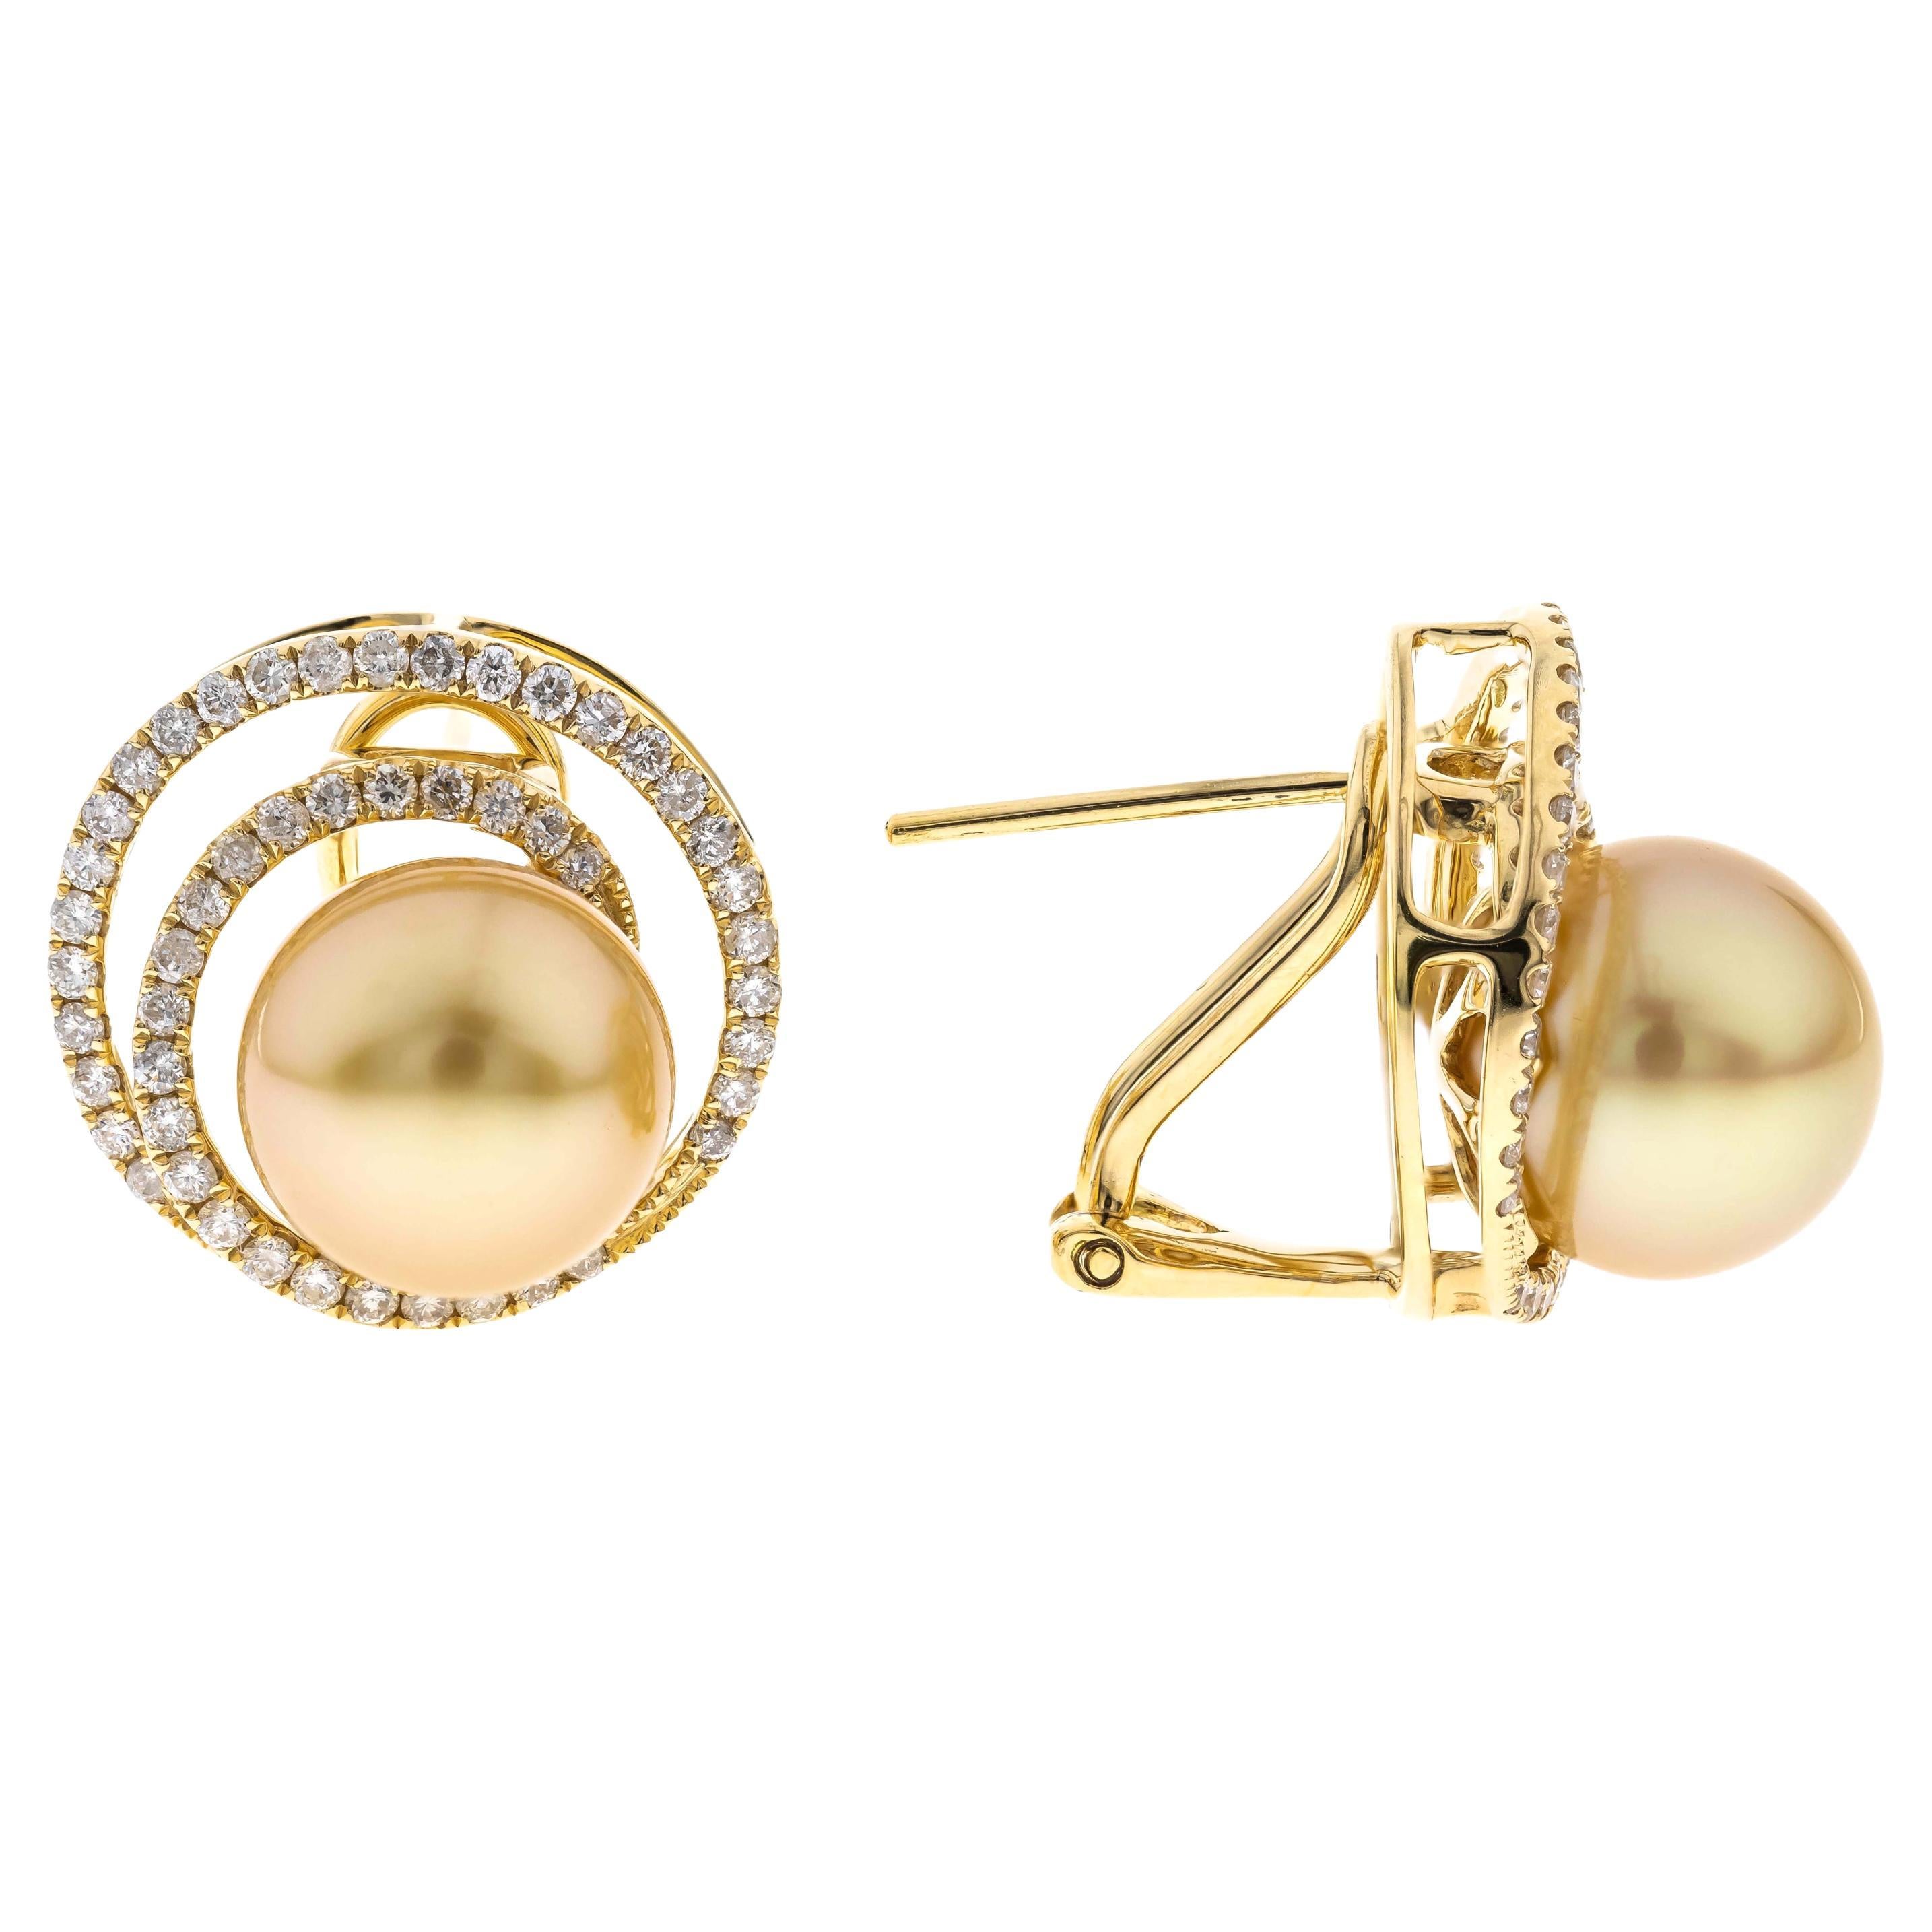 16.22 Carat South sea Pearl Diamond accents 18K Yellow Gold Earring.